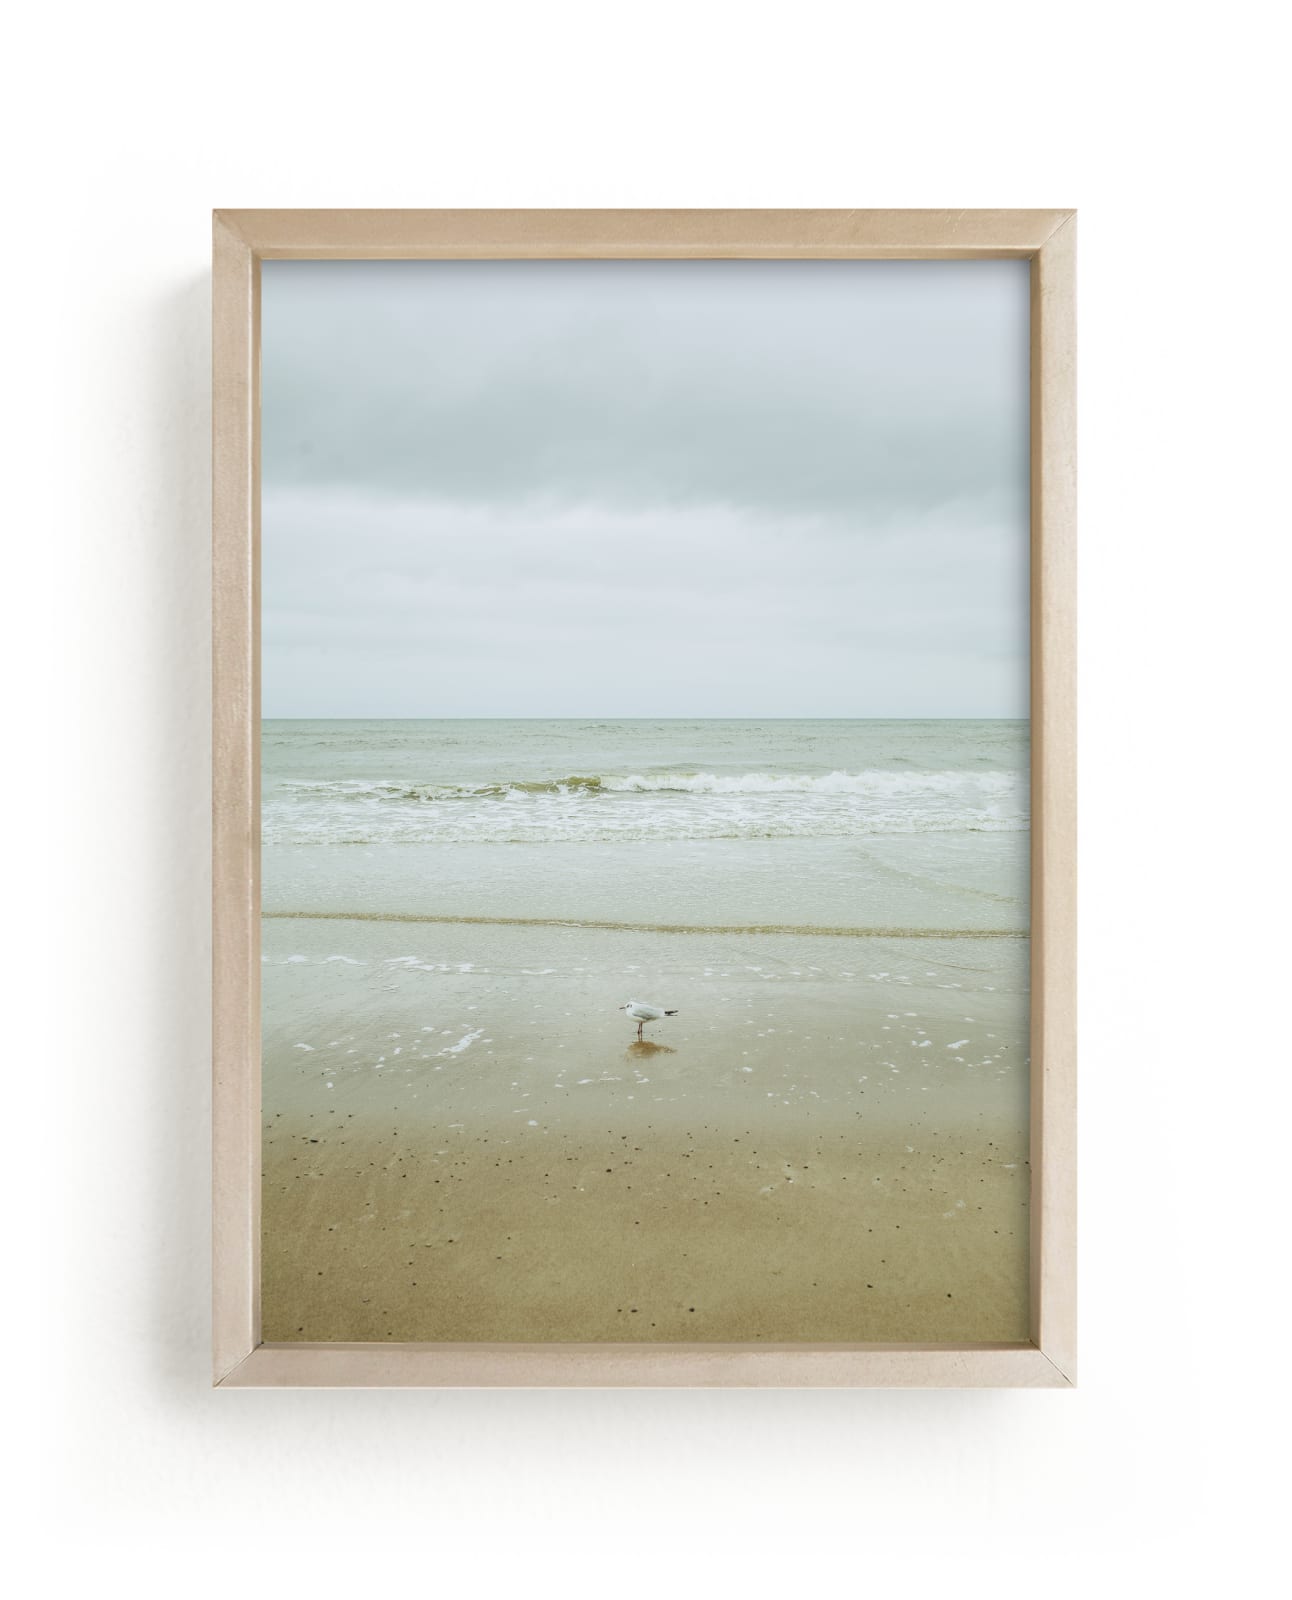 "Seaside triptych" by Lying on the grass in beautiful frame options and a variety of sizes.